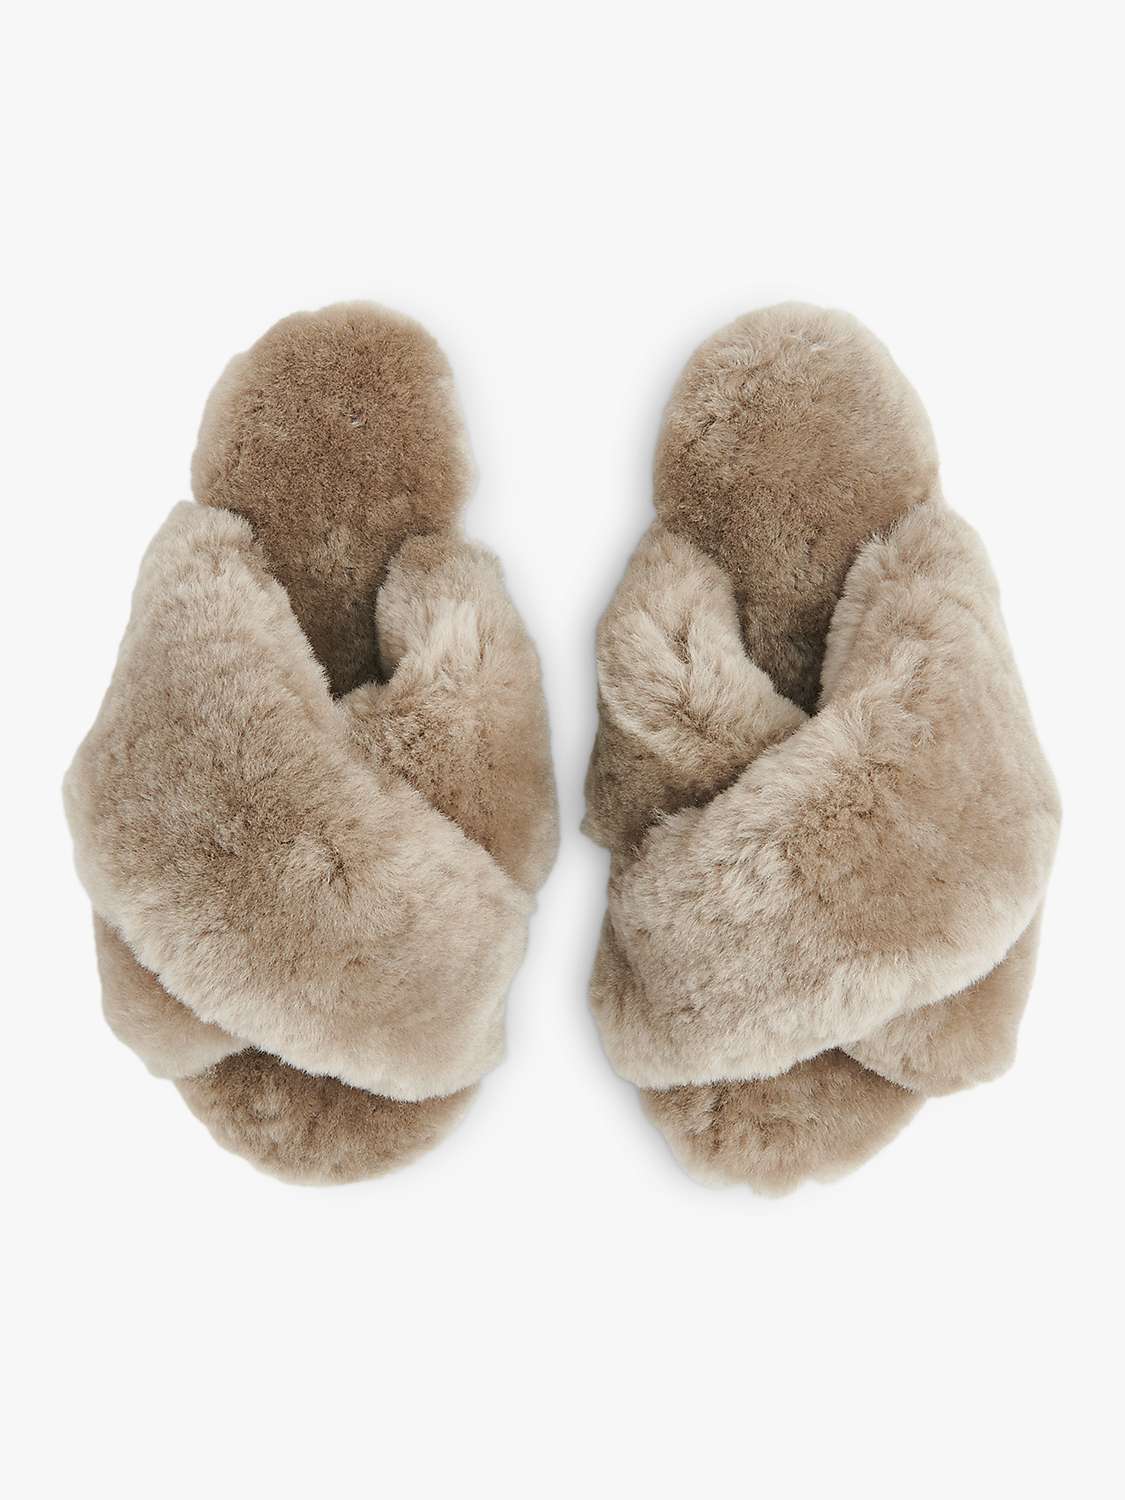 Buy Whistles Macy Sheepskin Cross Strap Slippers, Taupe Online at johnlewis.com